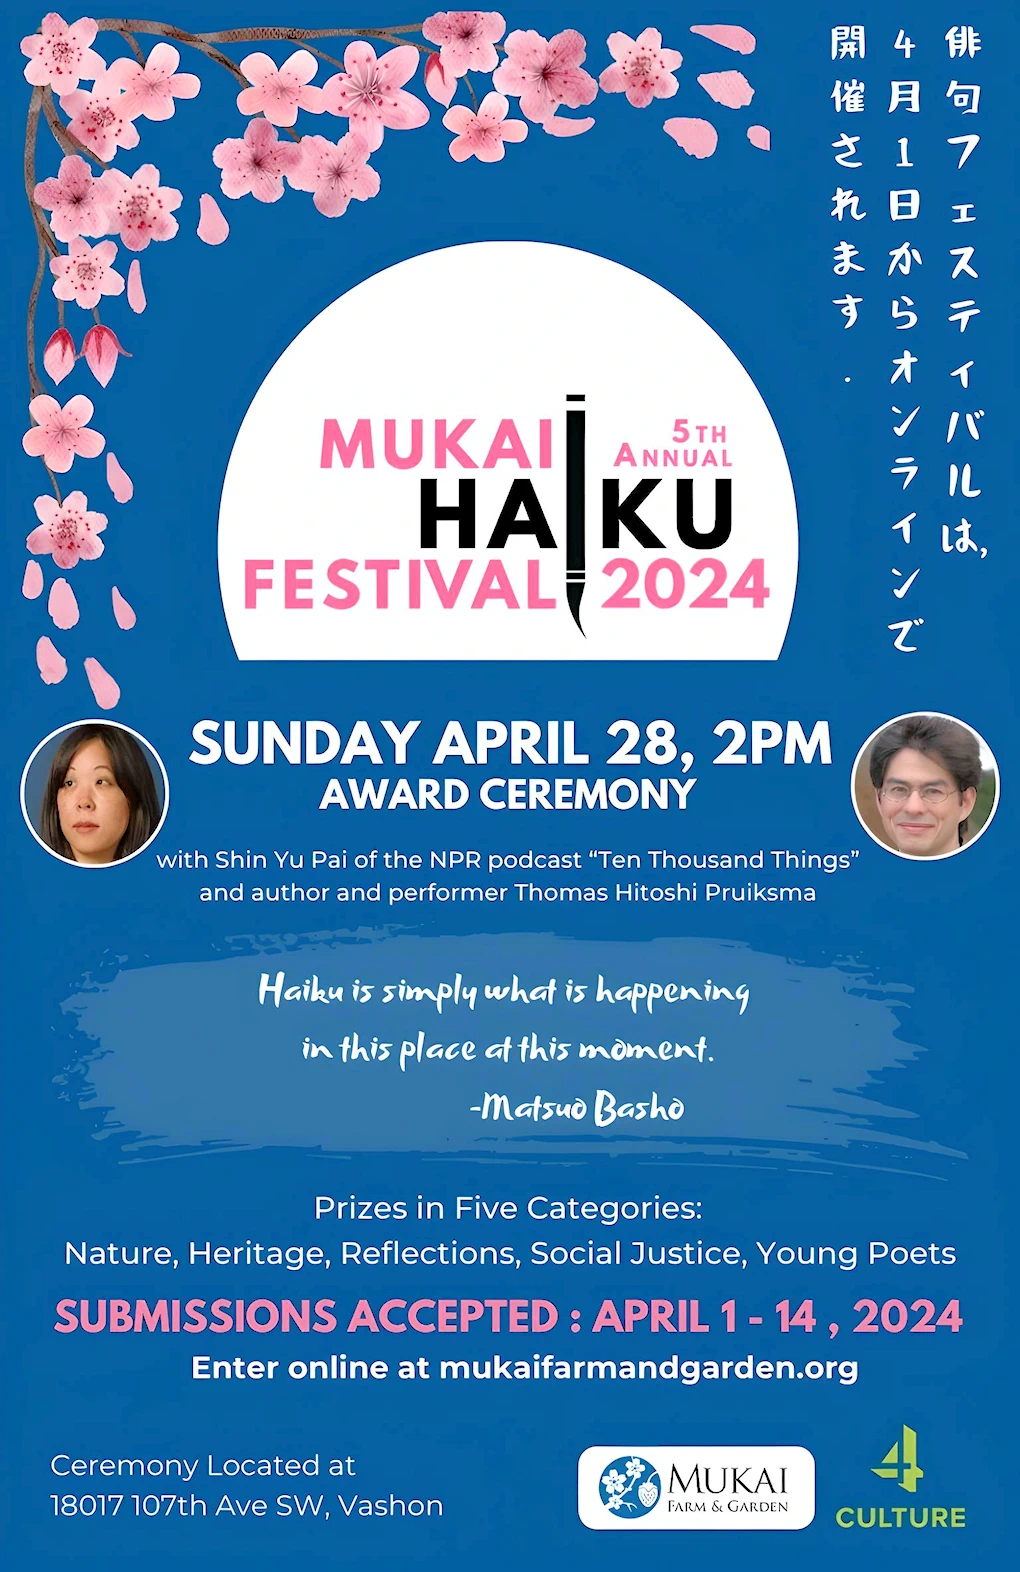 2023 Annual Haiku Festival Event - An Ancient Style of Japanese Poetry (Deadline March 31st) Mukai Farms